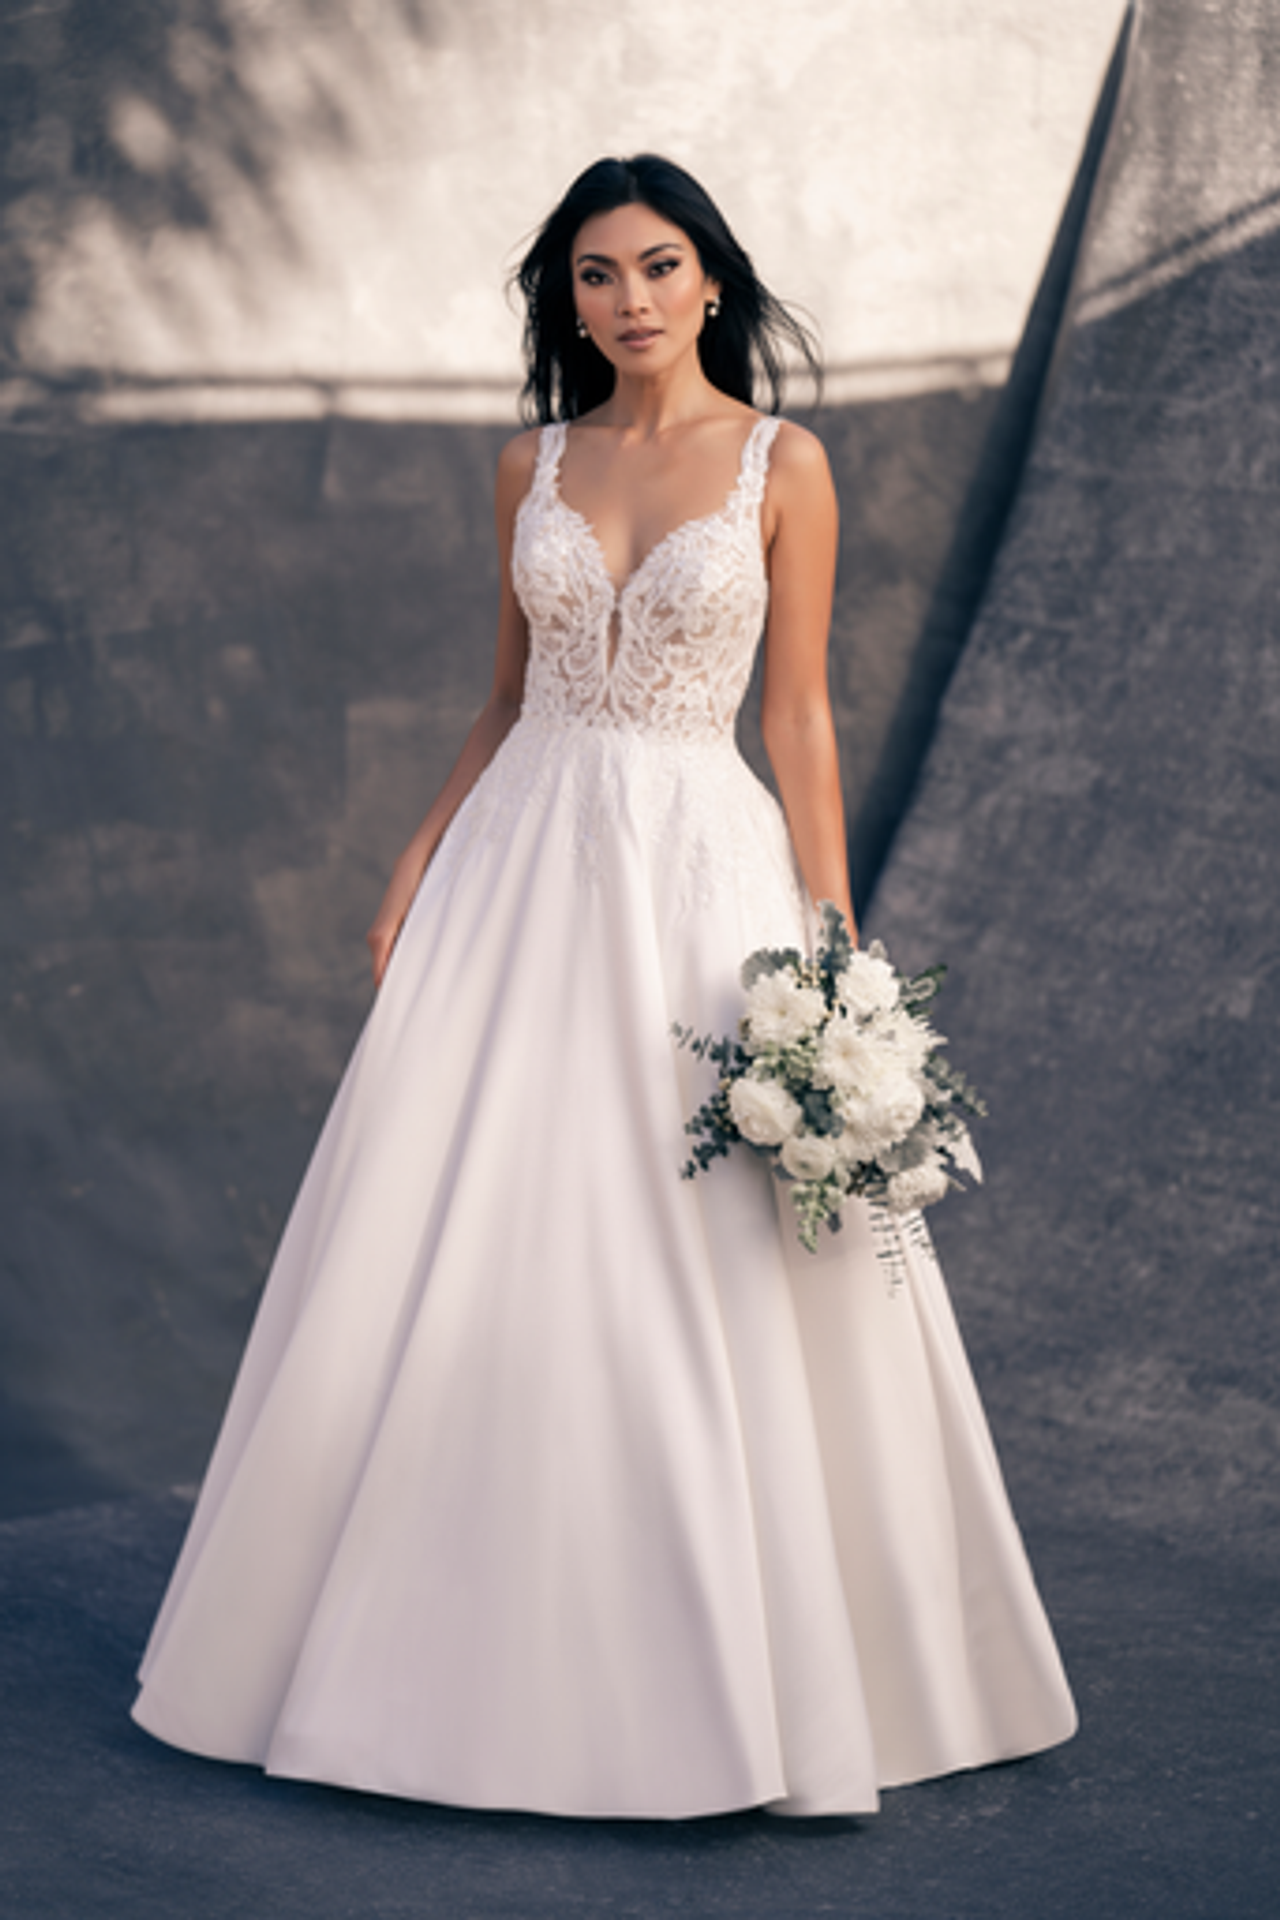 Classic Ballgown With Beaded Lace Appliques by Allure Bridals